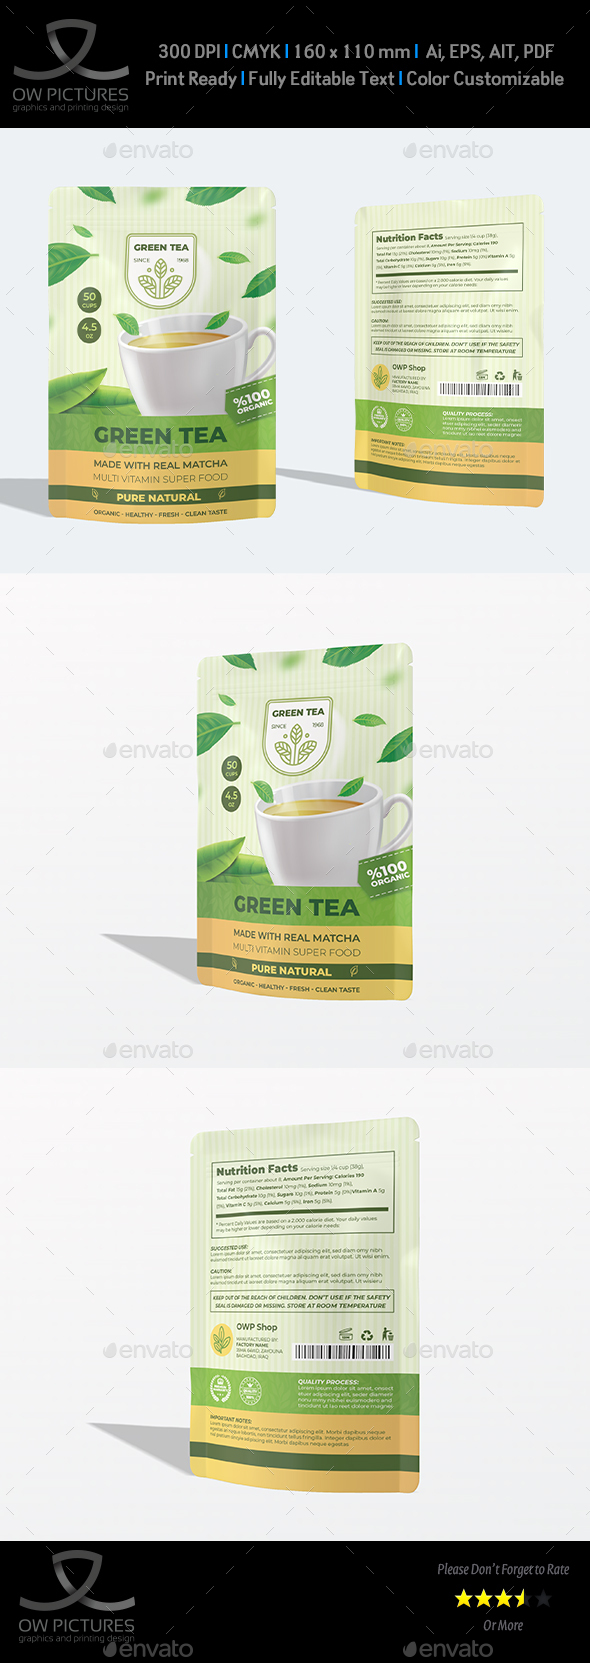 Green Tea Pouch Mylar Bag Template for Packaging